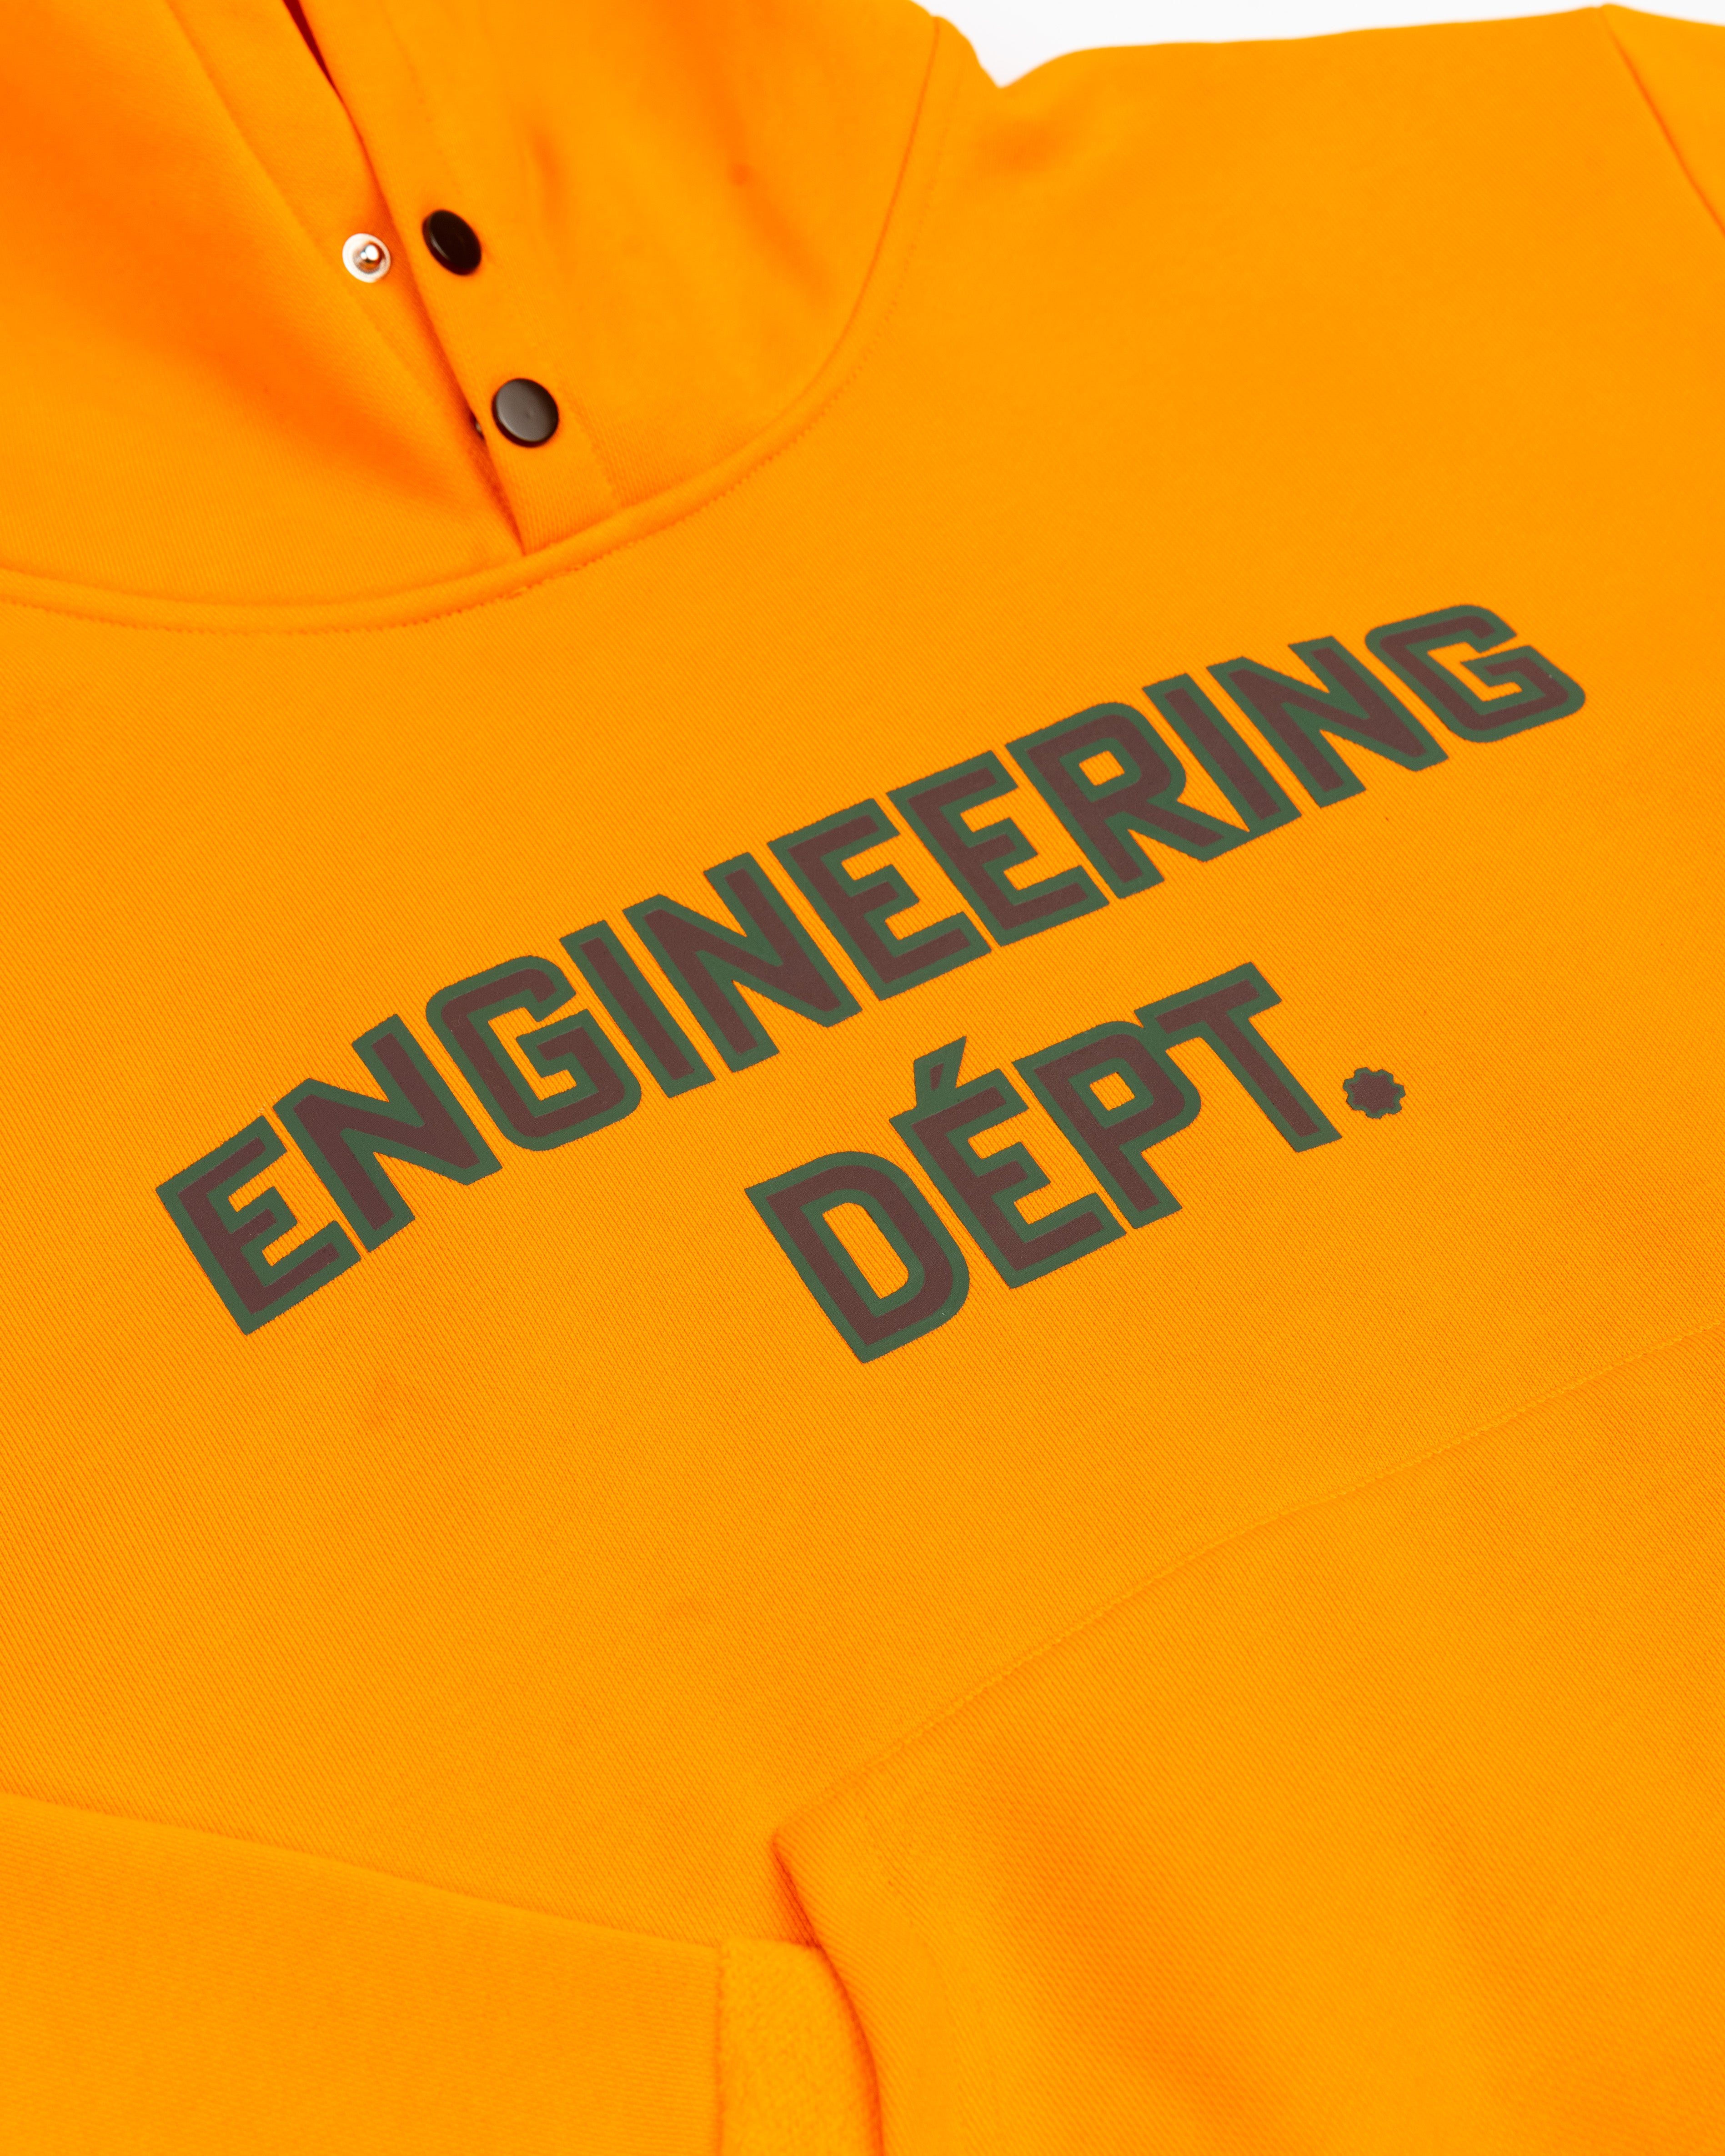 Engineered By Dré